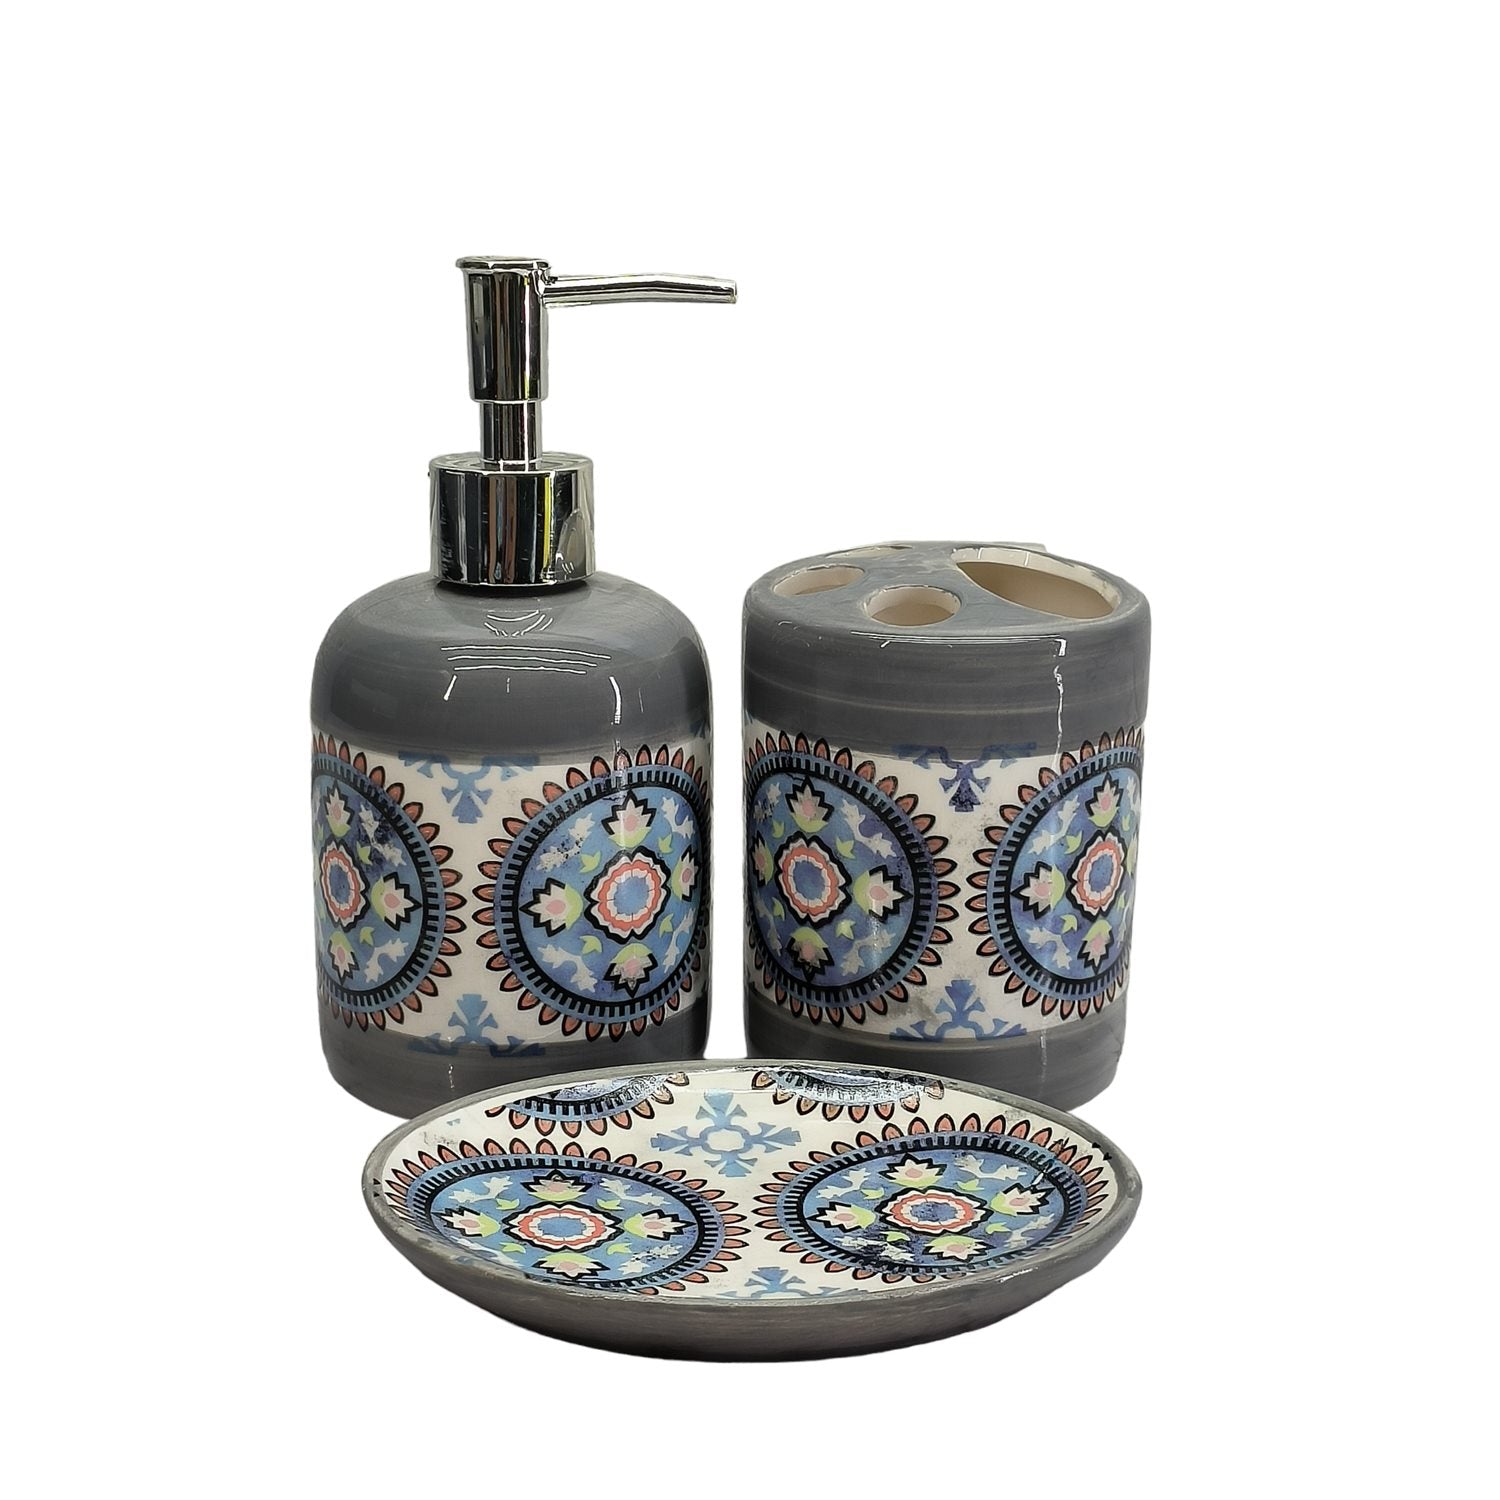 Ceramic Soap Dispenser Set with Toothbrush Holder and Soap Dish, Set of 3 Bathroom Accessories for Home (C3031)